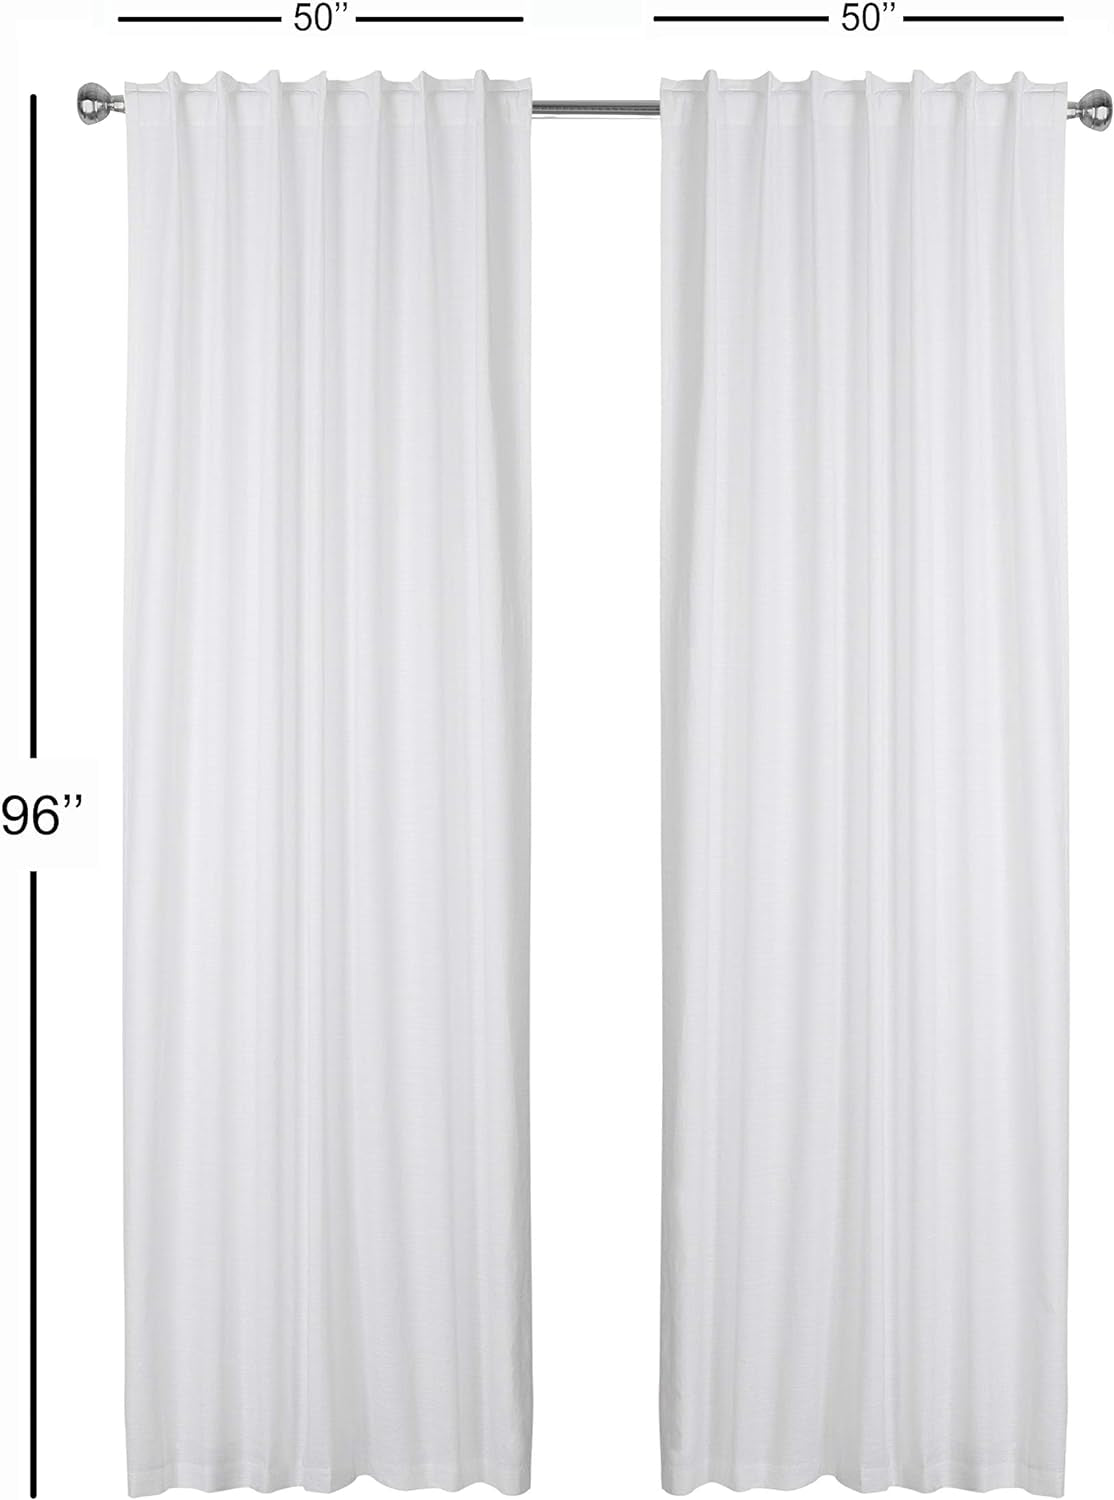 White Cotton Curtains 96 Inches Long for Living Room - Textured Semi Sheer Light Filtering Window Curtain for Boho Décor - Farmhouse Linen Back Tab Drapes for Bedroom Kitchen - 50X96 Inch, 2 Panels  The Beer Valley   